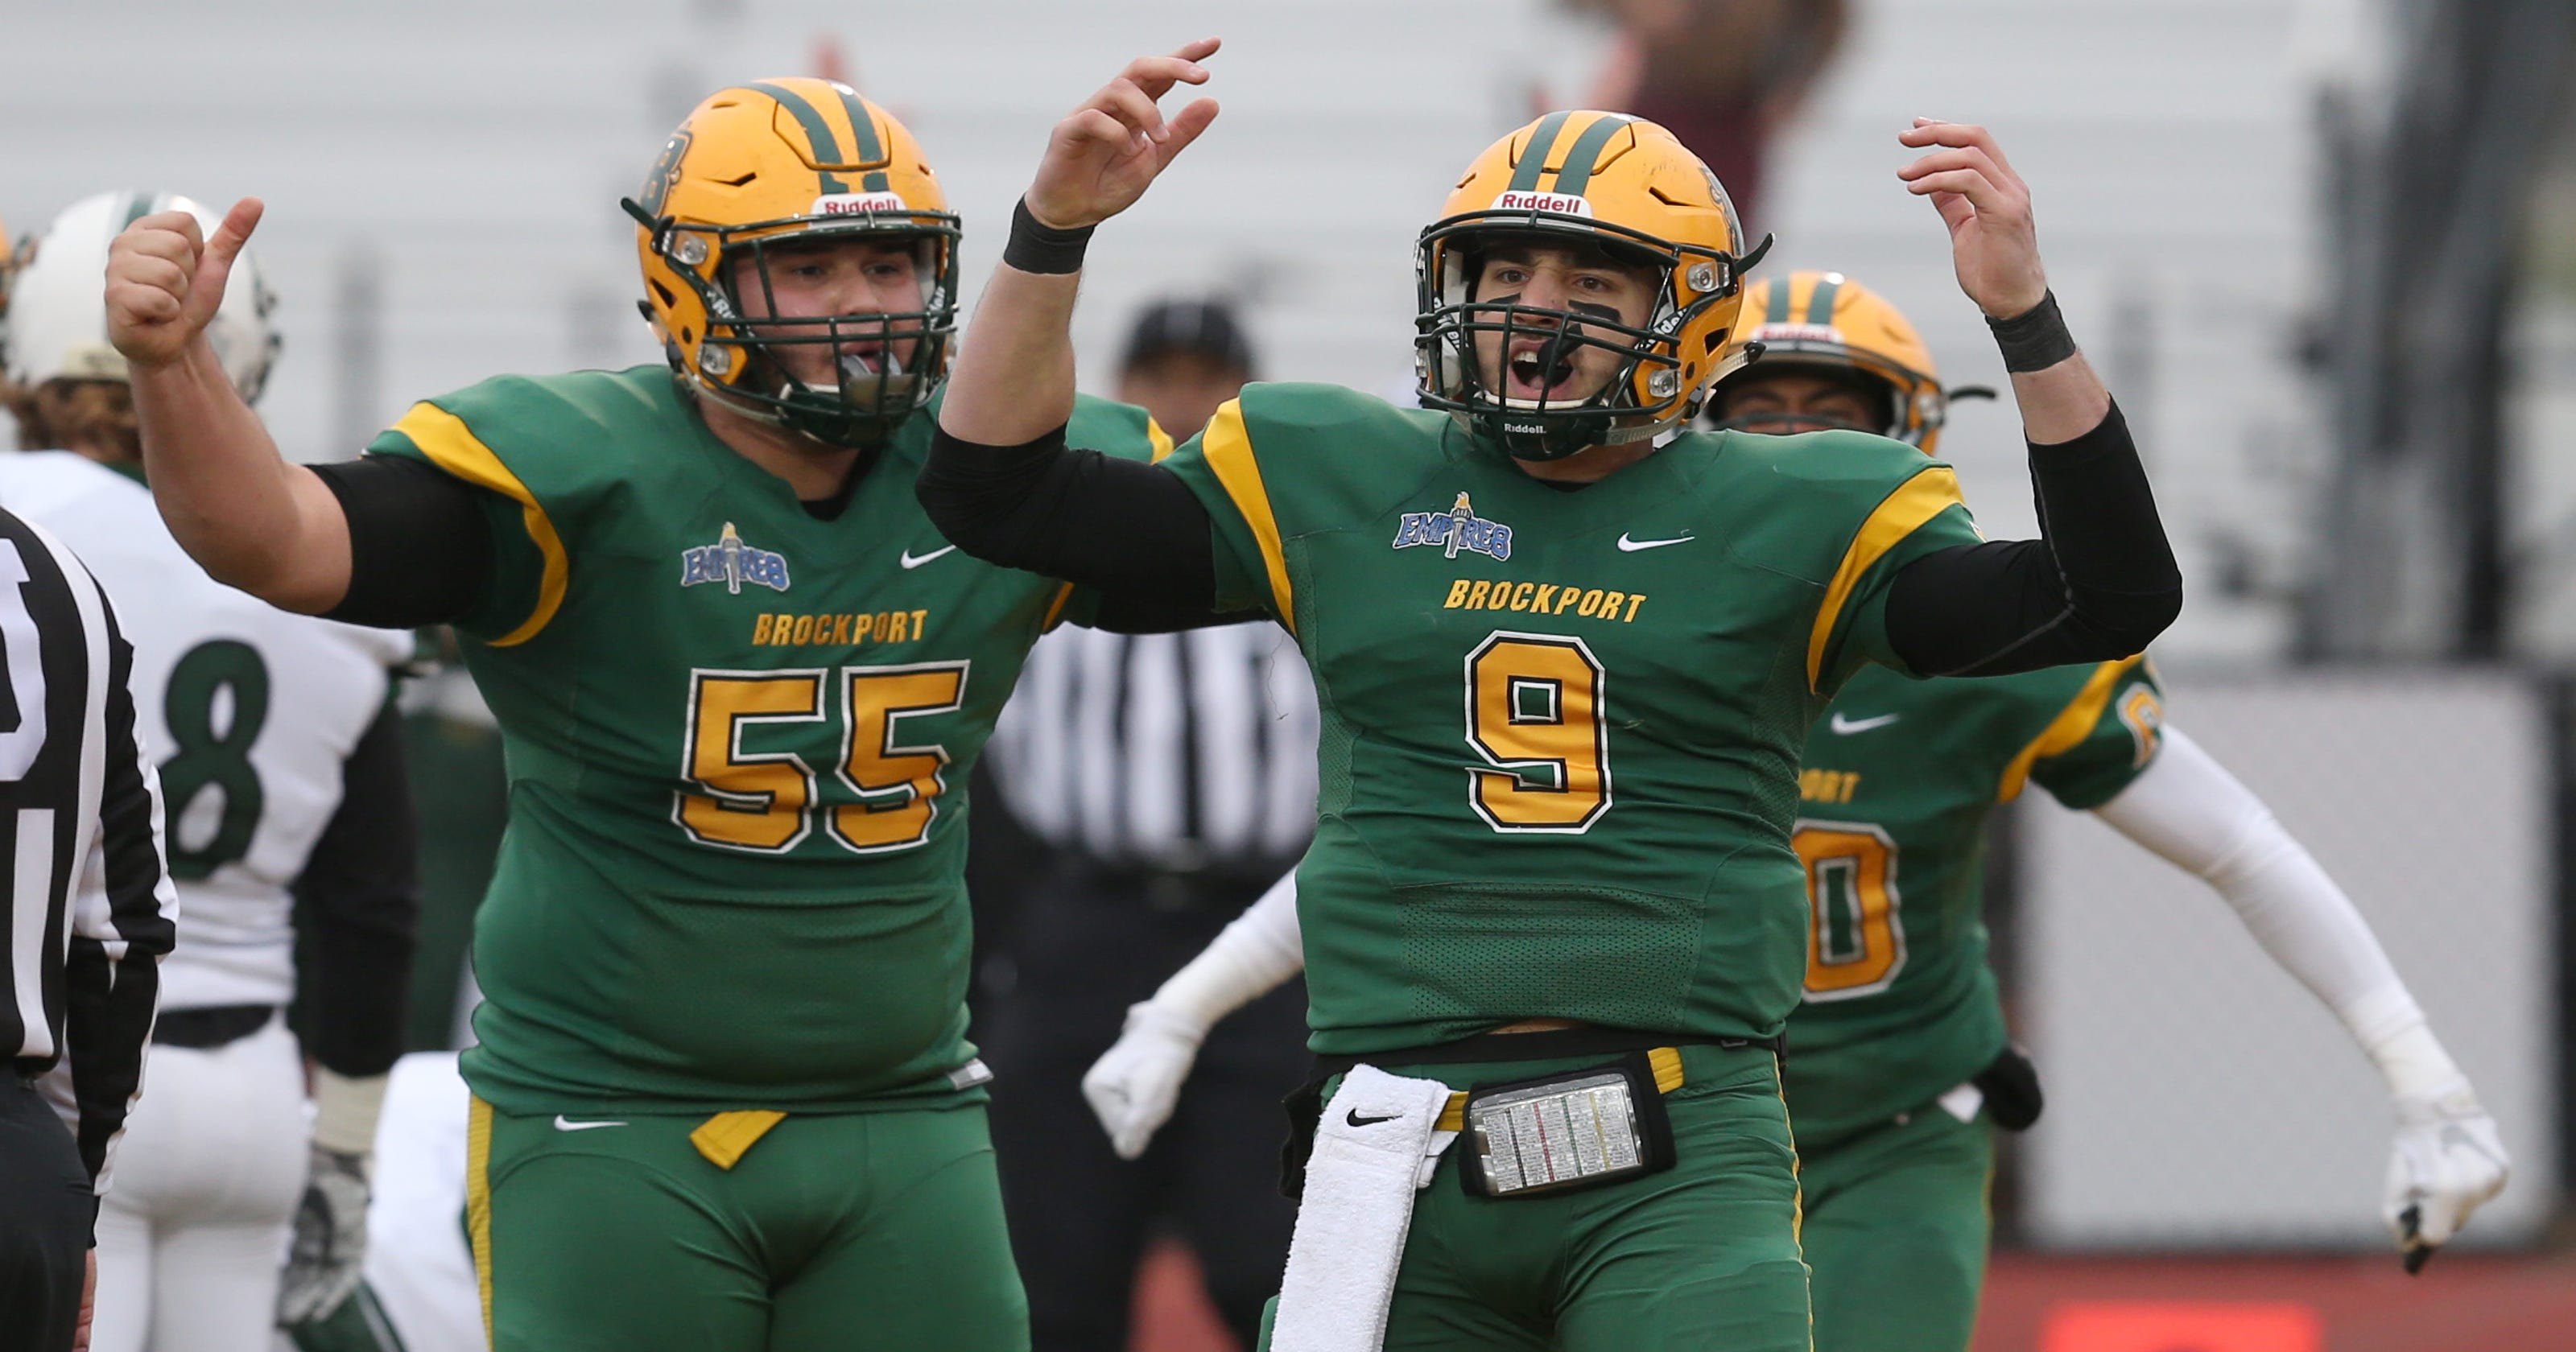 Game-ending field goal lifts Brockport into NCAA D3 semifinal